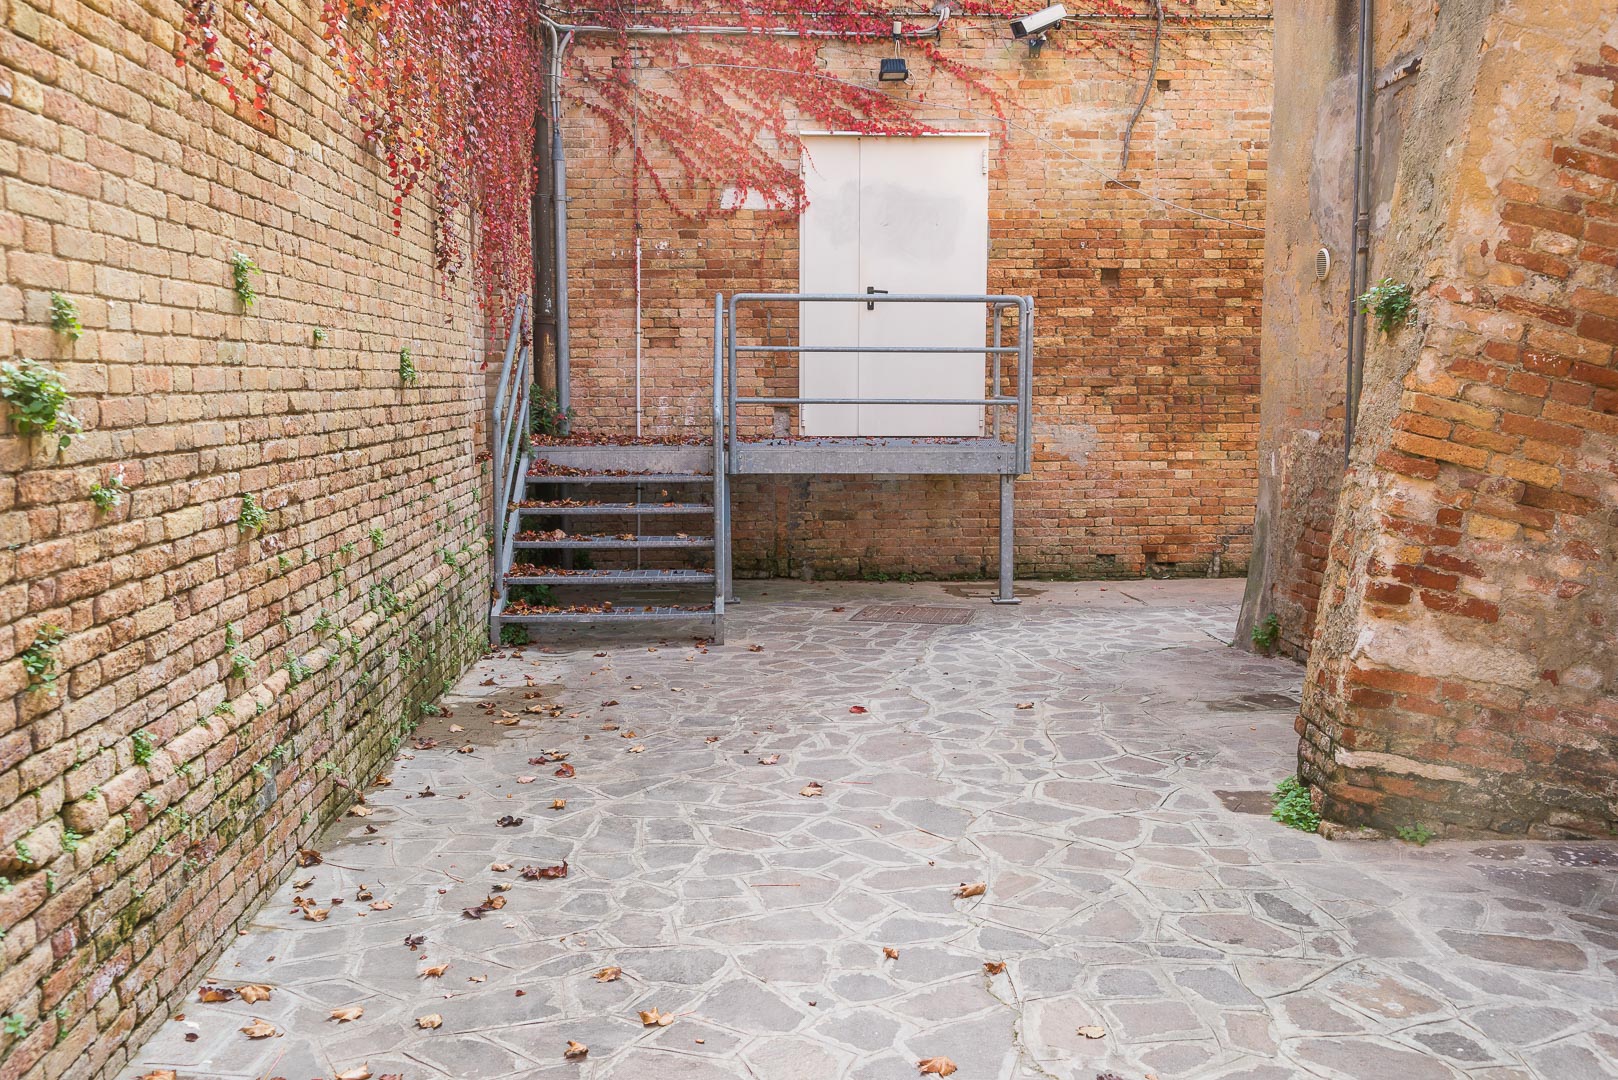 Backplate • ID: 13740 • HDRI Haven - Street With Brick Wall Covered With Leaves